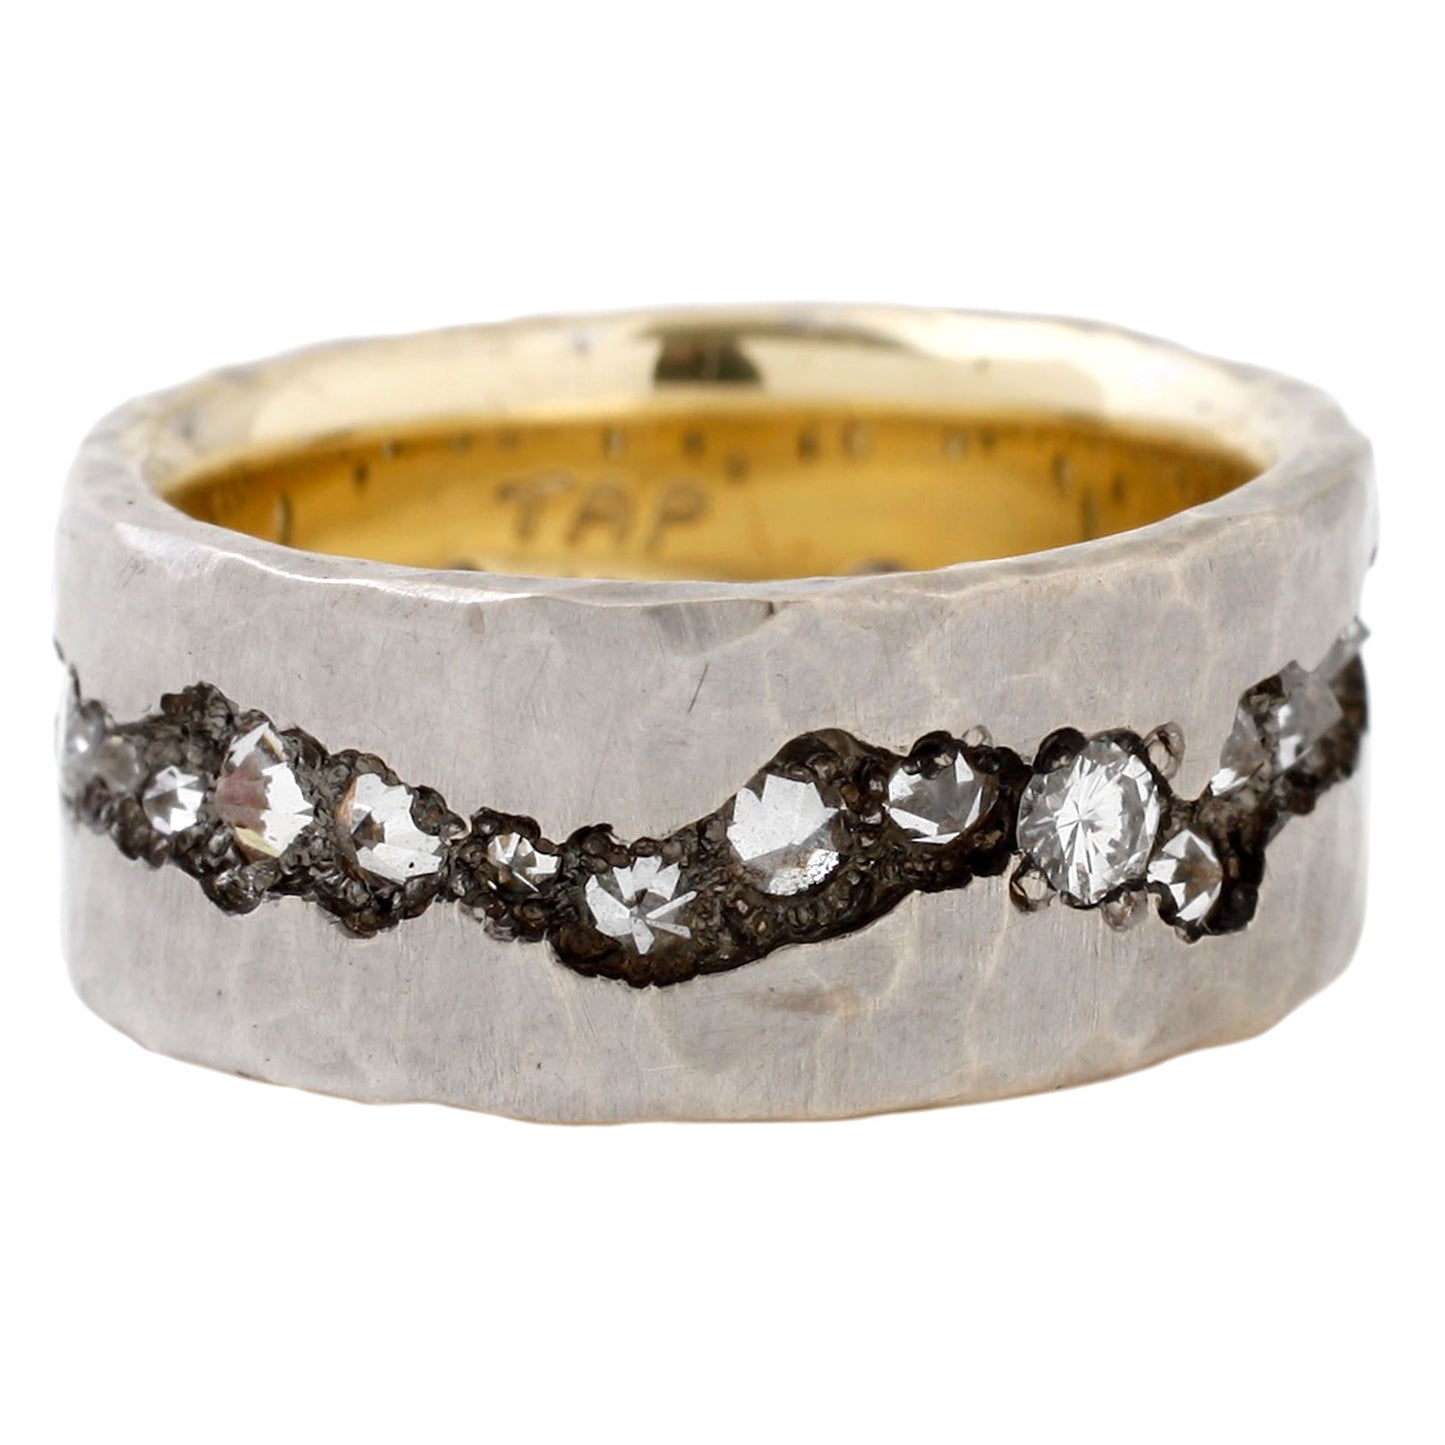 TAP by Todd Pownell White Diamond Eternity Band Ring